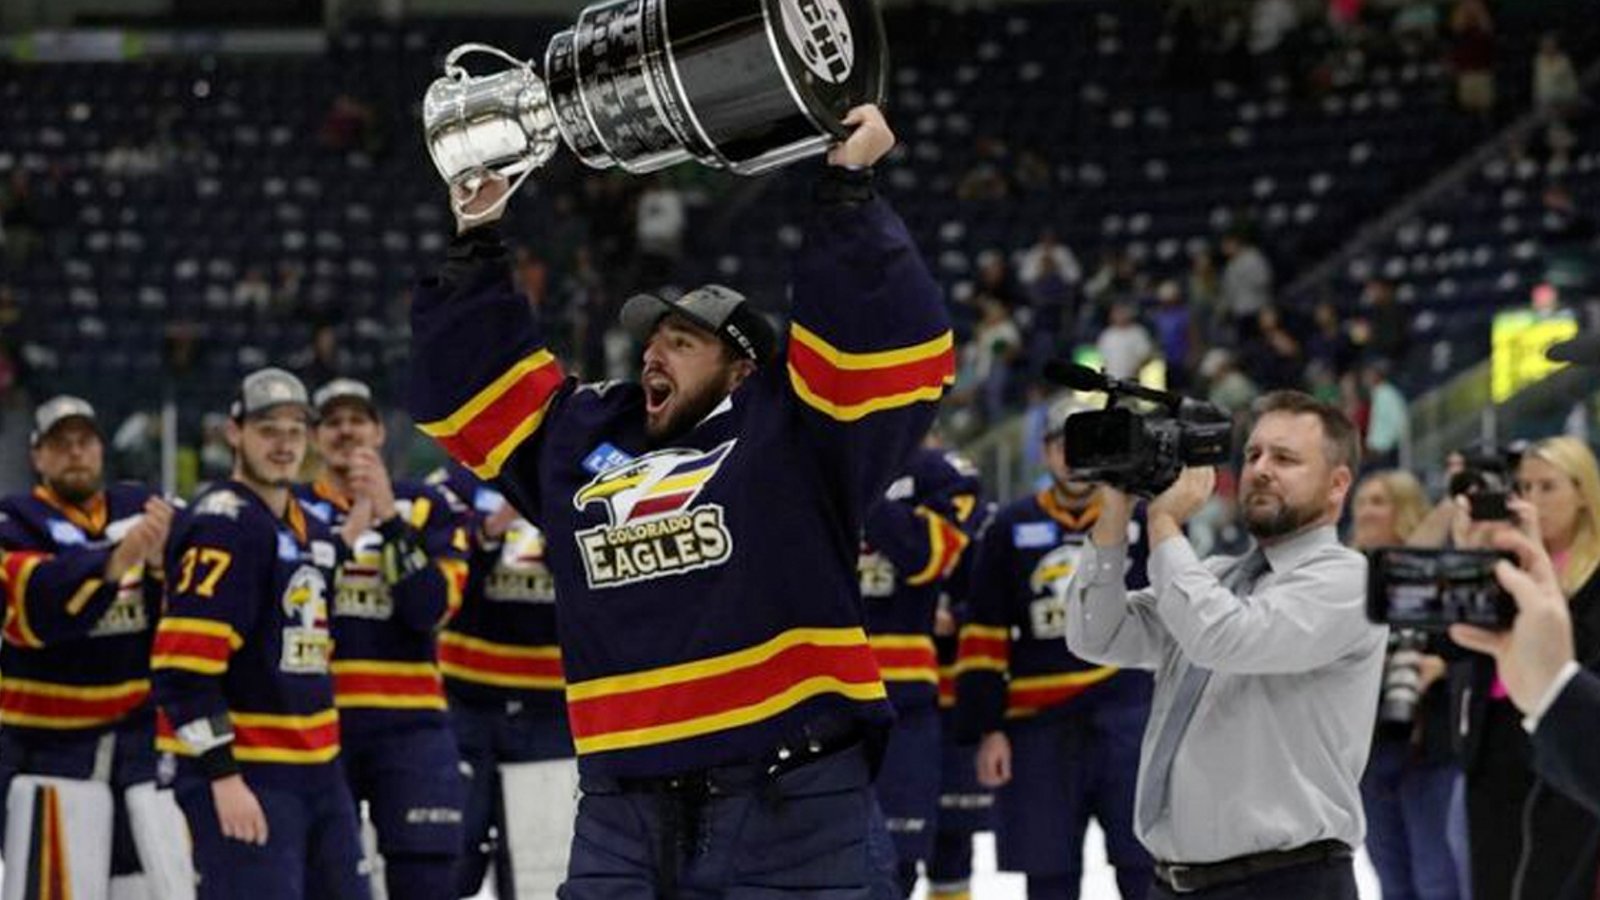 The Colorado Eagles are refusing to return the Kelly Cup to the ECHL